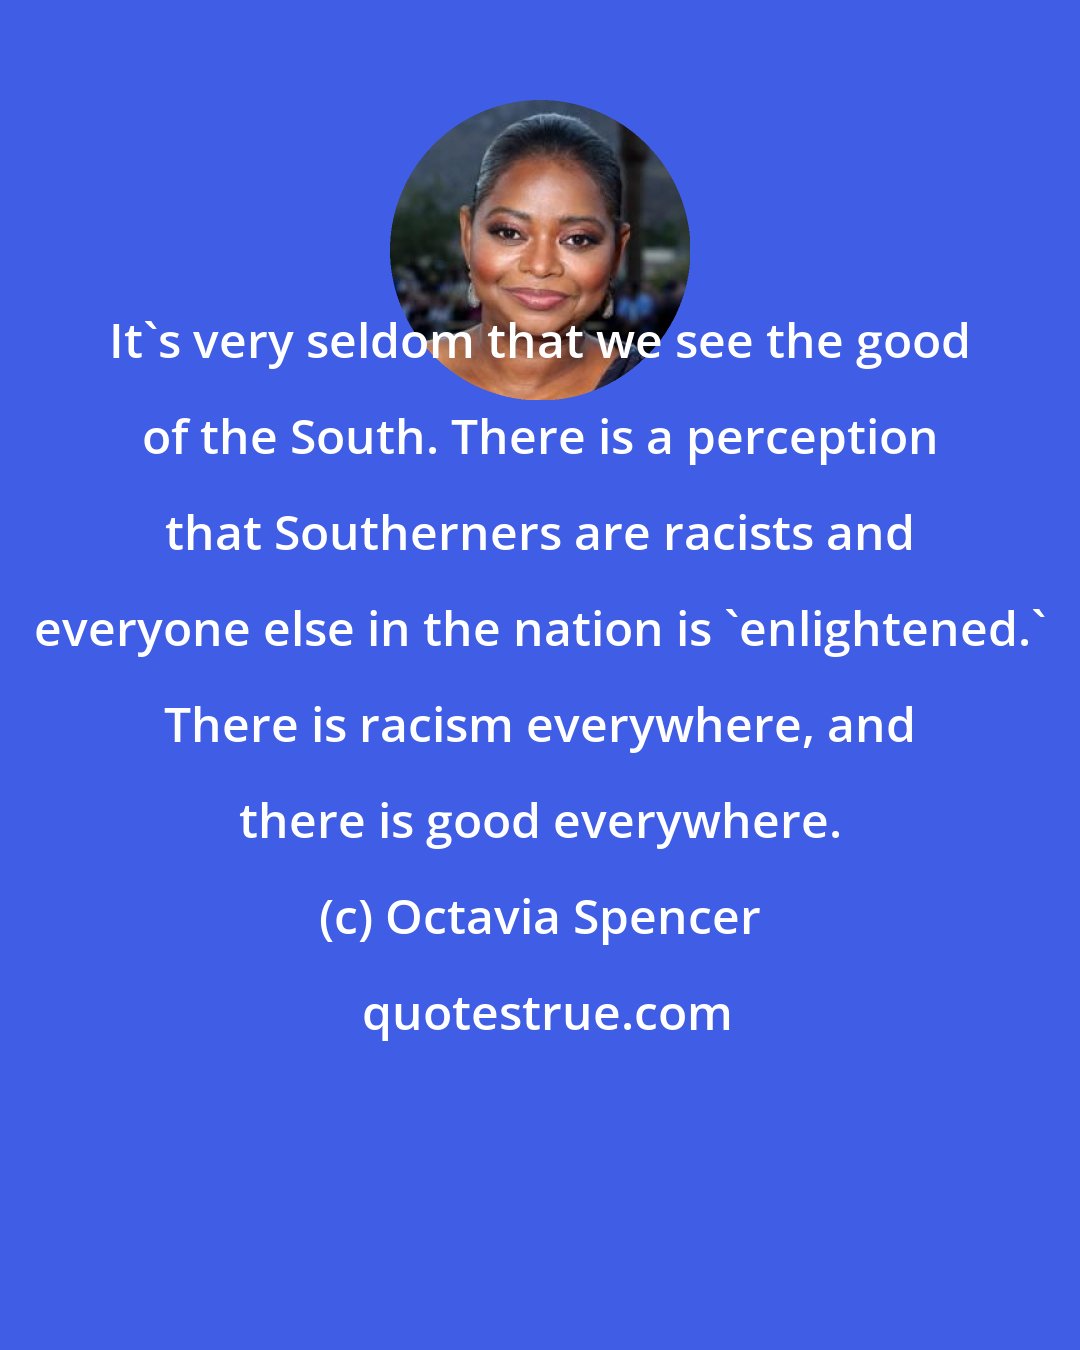 Octavia Spencer: It's very seldom that we see the good of the South. There is a perception that Southerners are racists and everyone else in the nation is 'enlightened.' There is racism everywhere, and there is good everywhere.